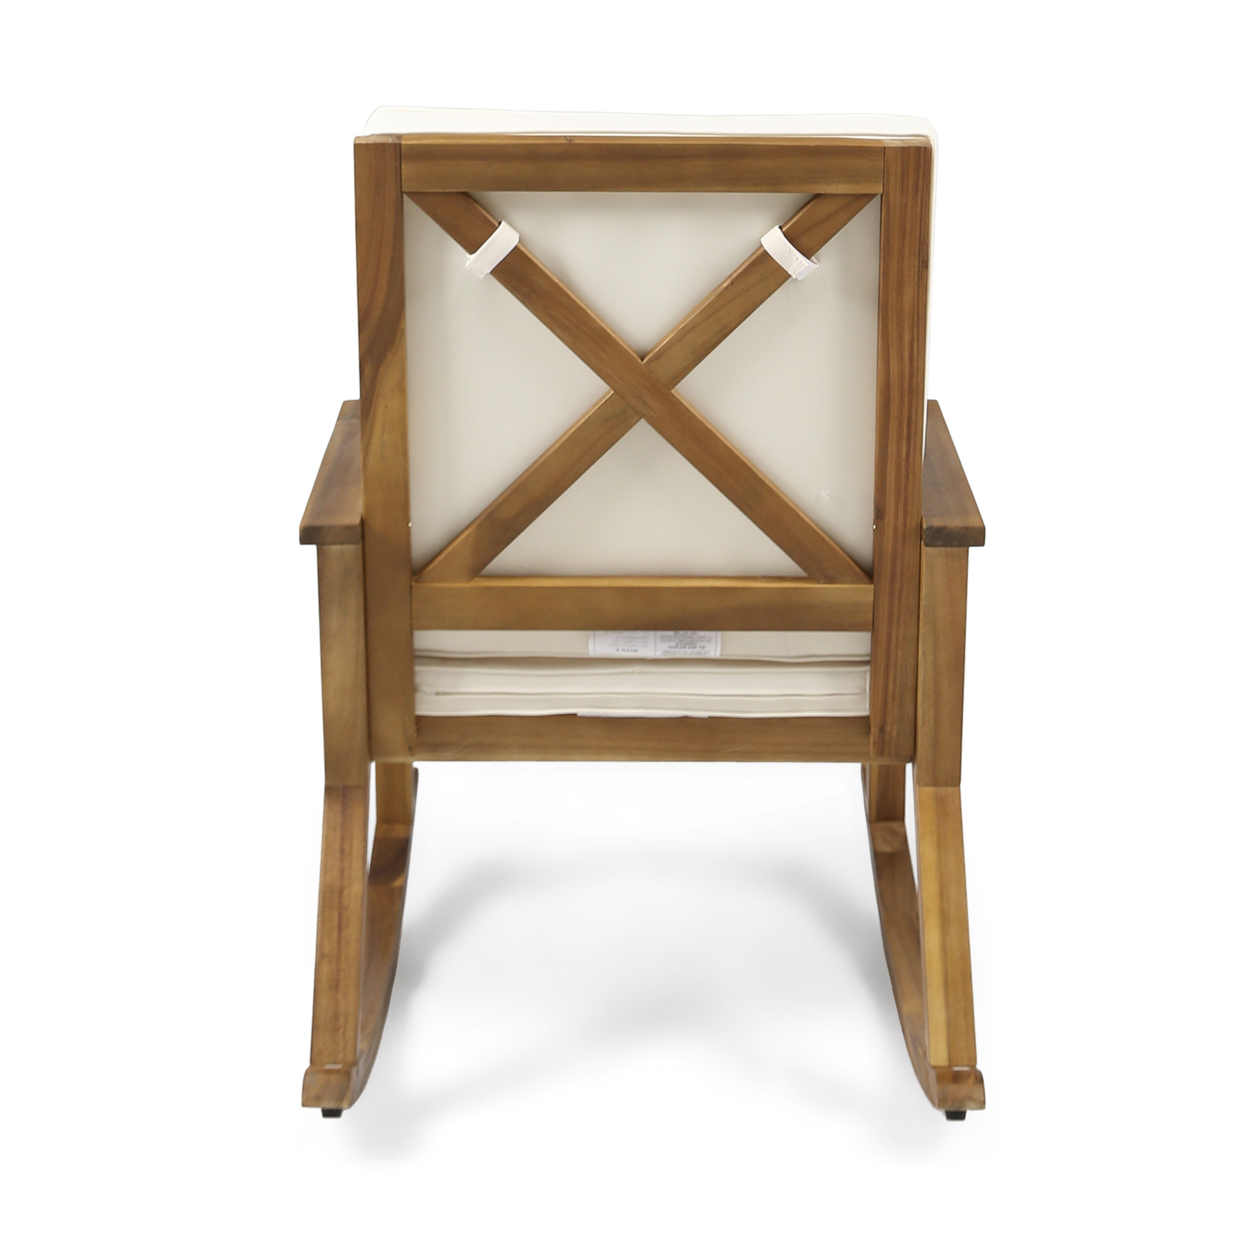 Alize Outdoor Acacia Wood Rocking Chair and Side Table, Teak and Cream - image 4 of 7